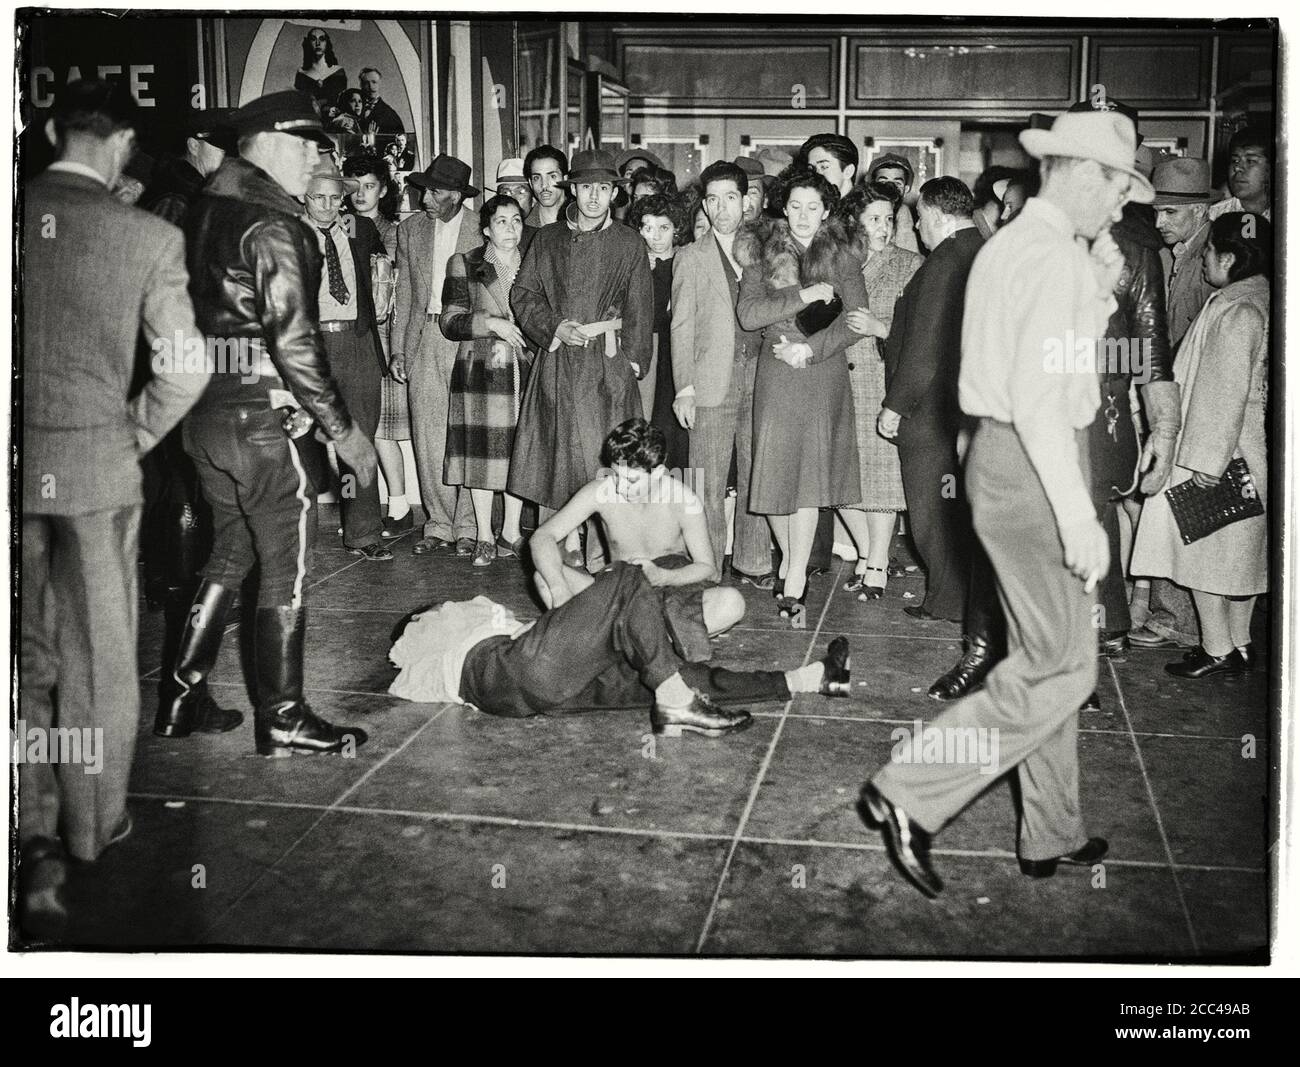 Zoot Suit Riots High Resolution Stock Photography and Images - Alamy